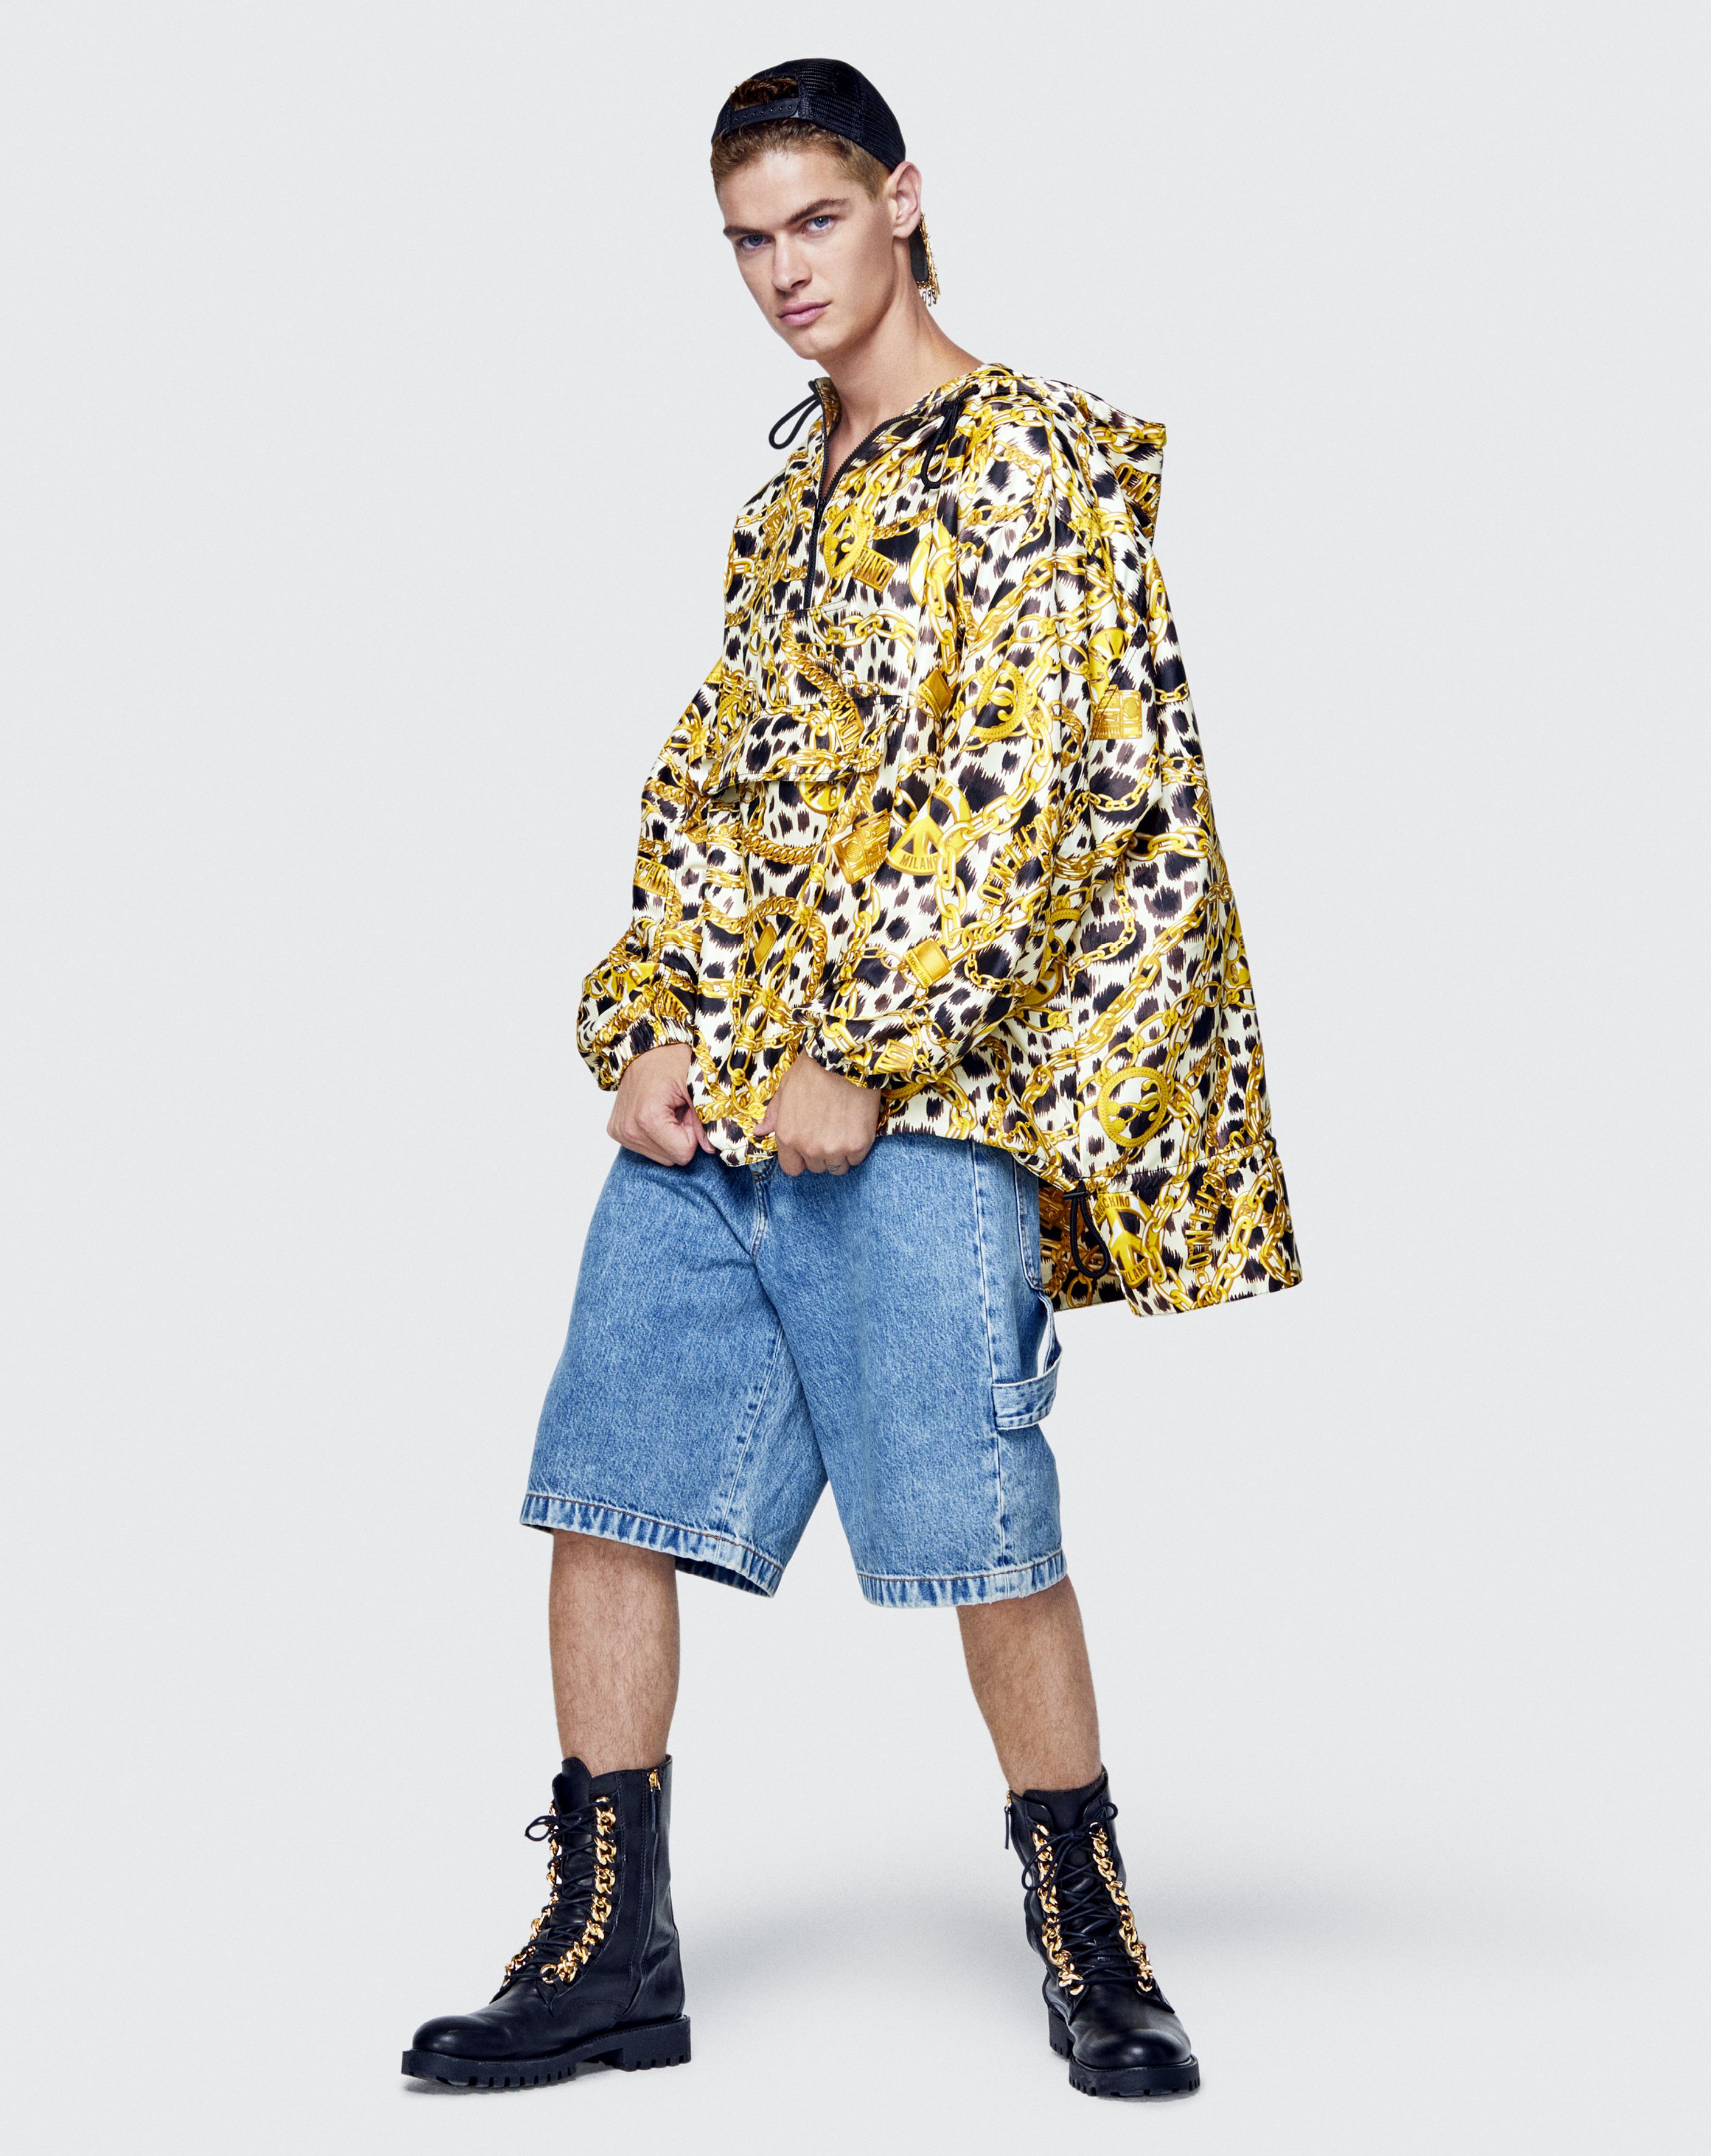 h&m moschino men collection